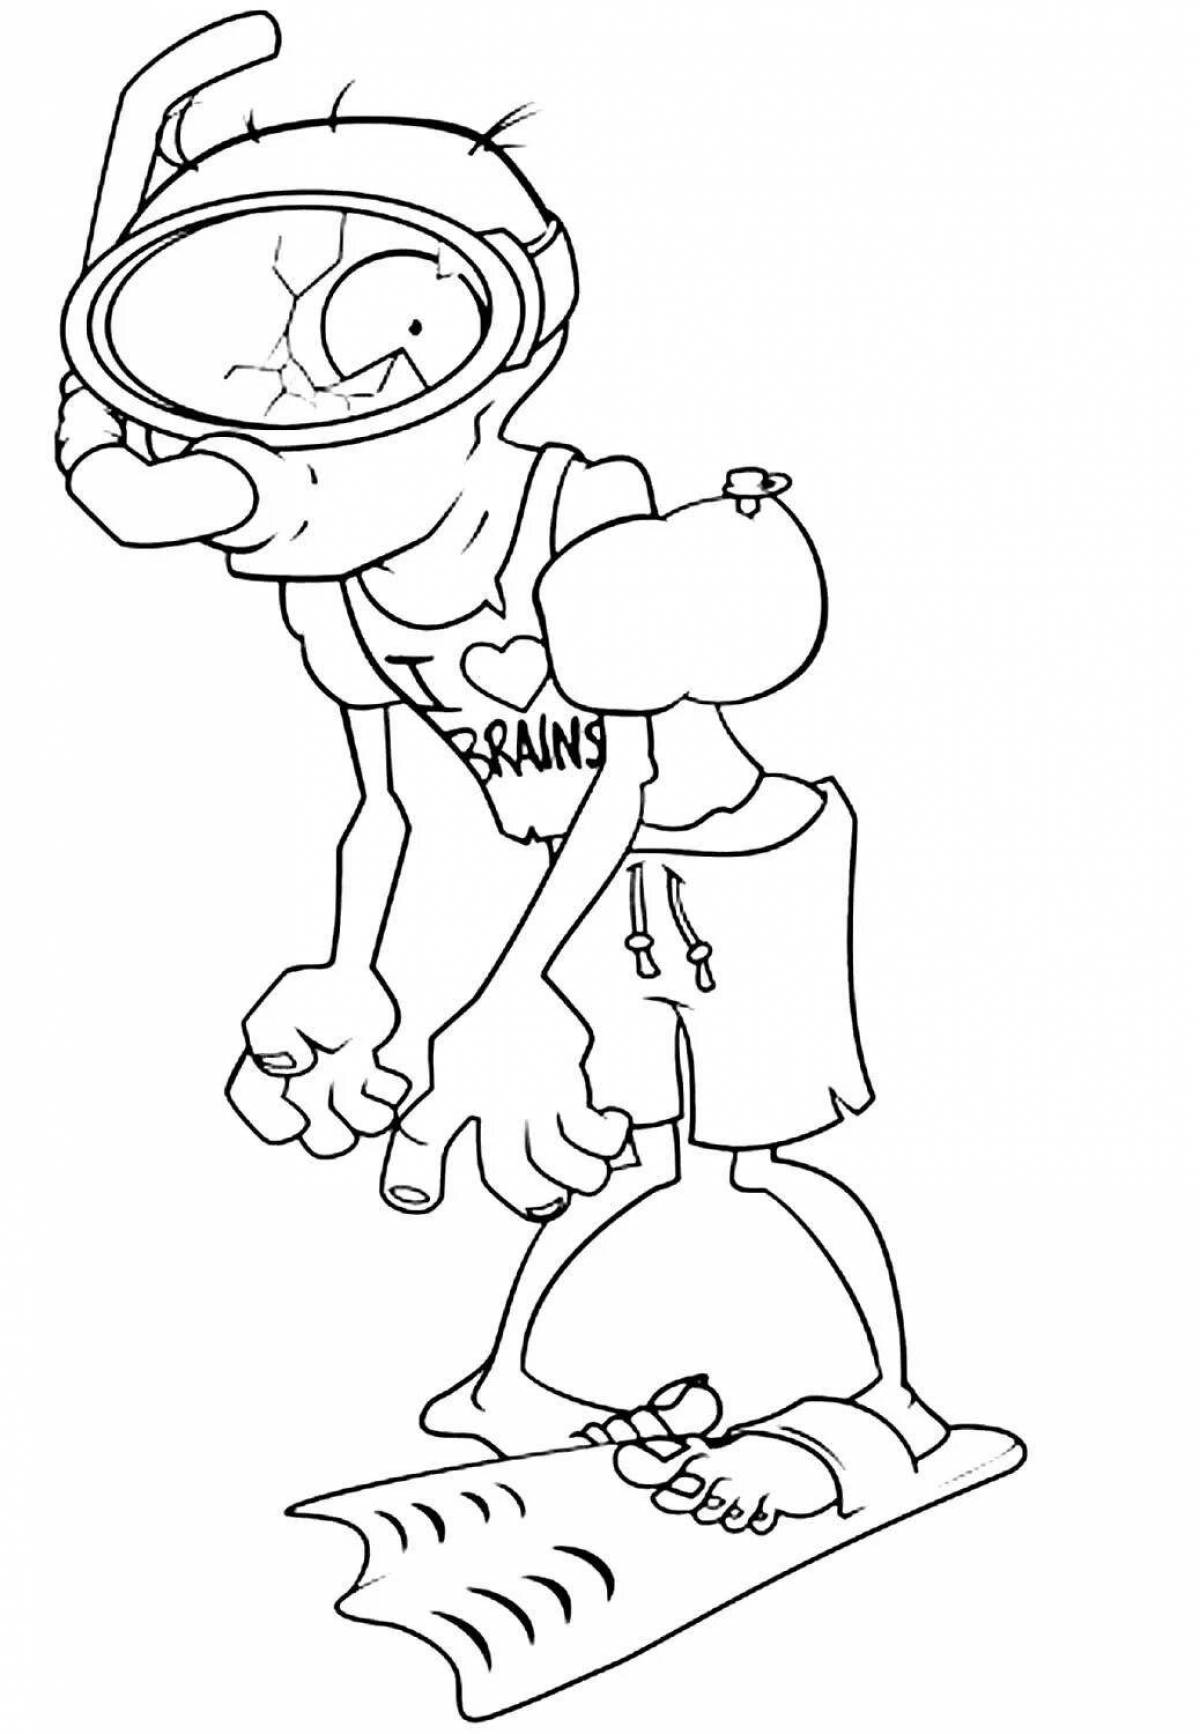 Zombie nasty coloring page